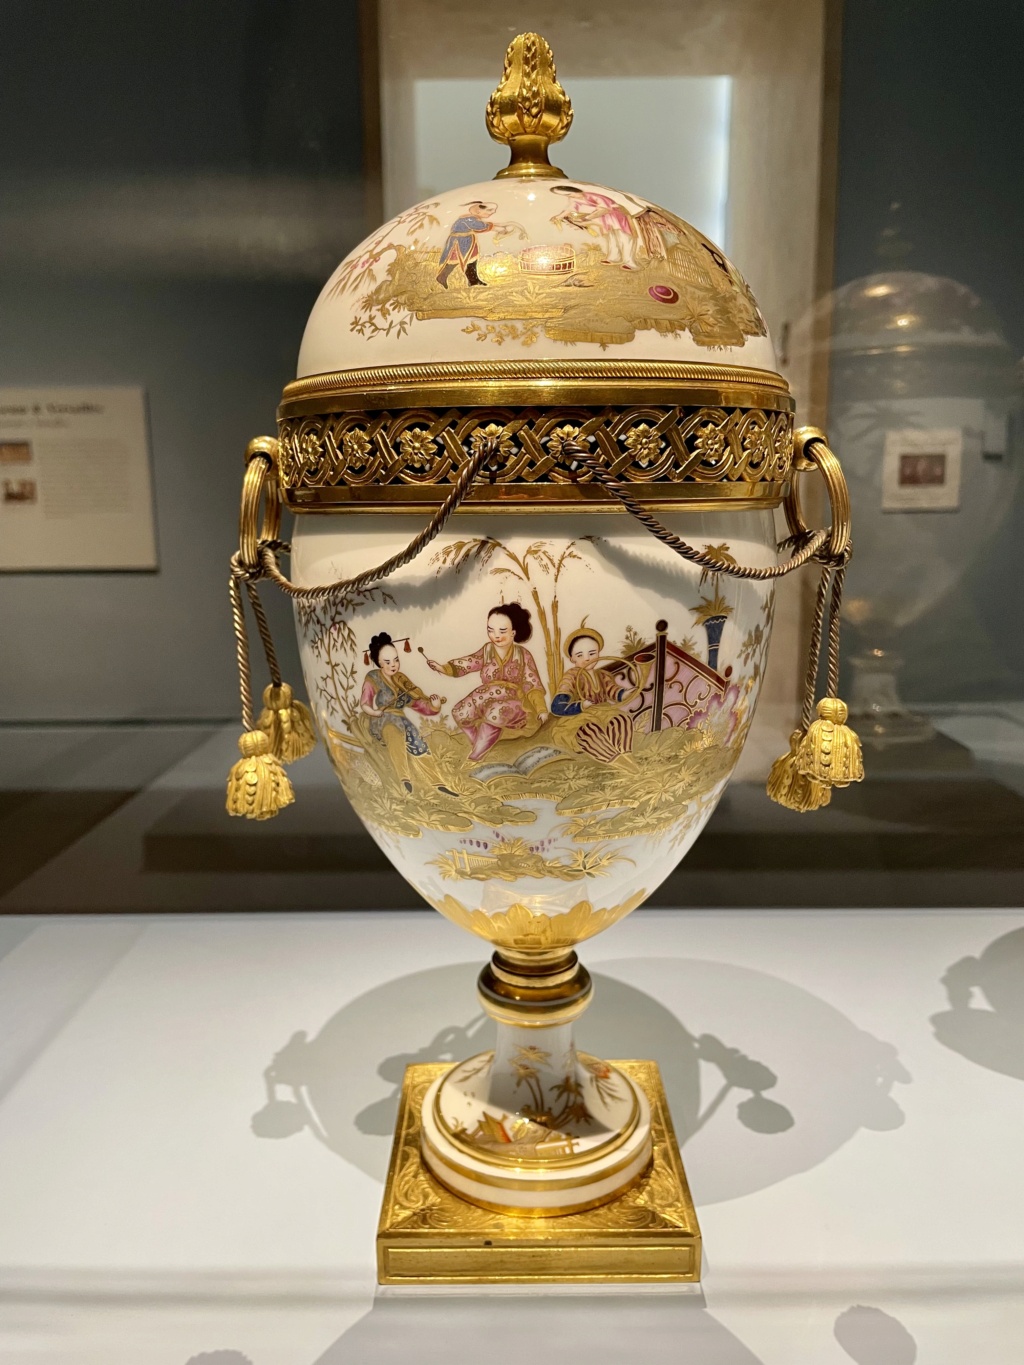 Exposition : Porcelain from Versailles Vases for a King & Queen. Getty Center, Los Angeles 672fe910